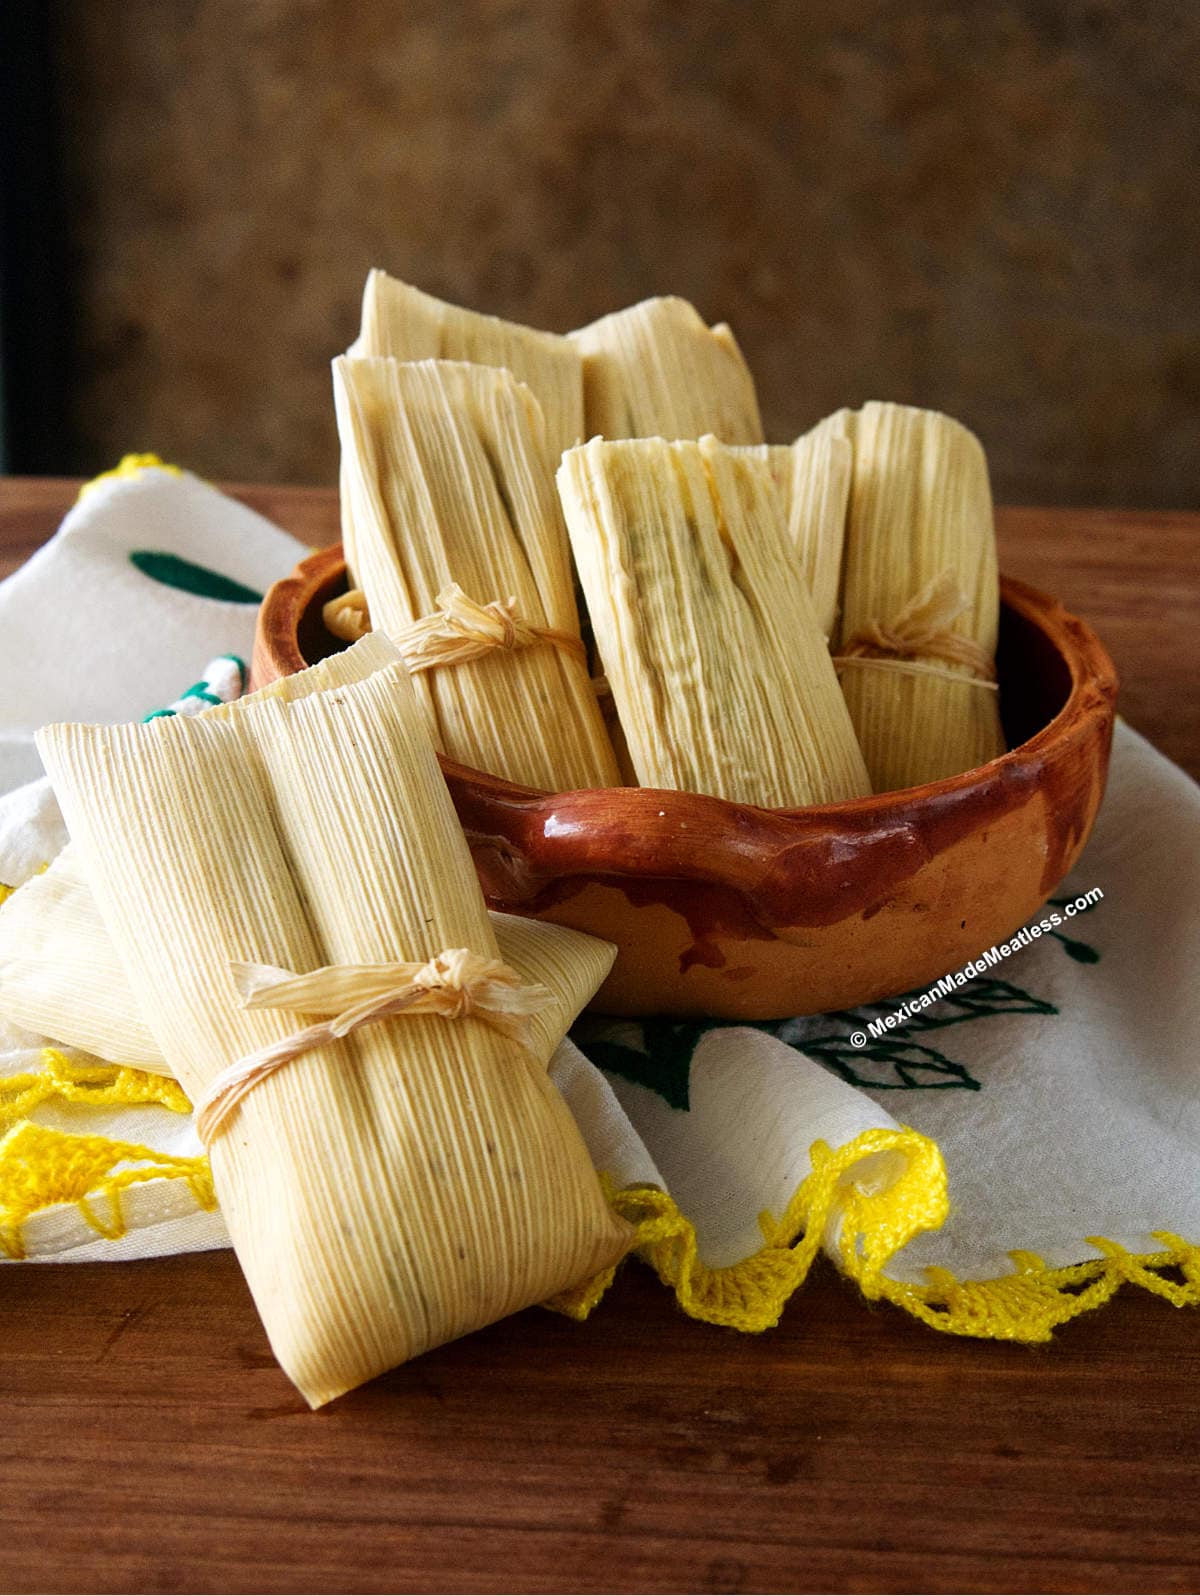 https://mexicanmademeatless.com/wp-content/uploads/2022/05/How-to-Steam-Tamales-without-Steamer01.jpg